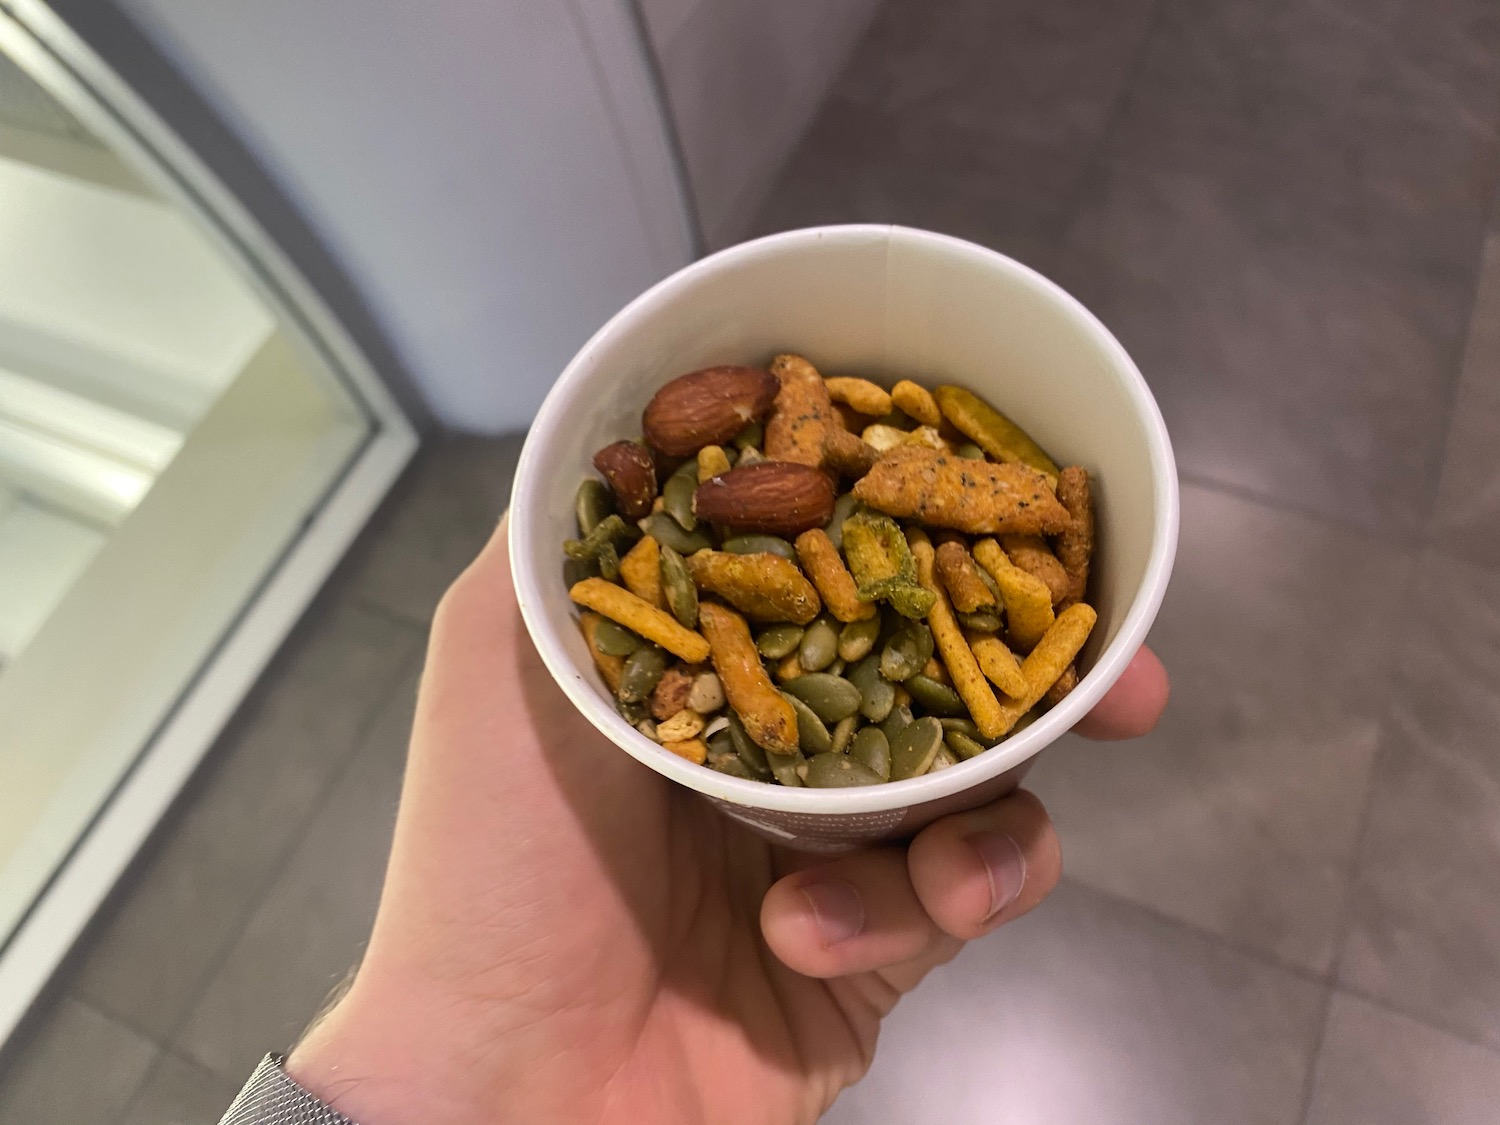 a hand holding a cup of mixed nuts and seeds